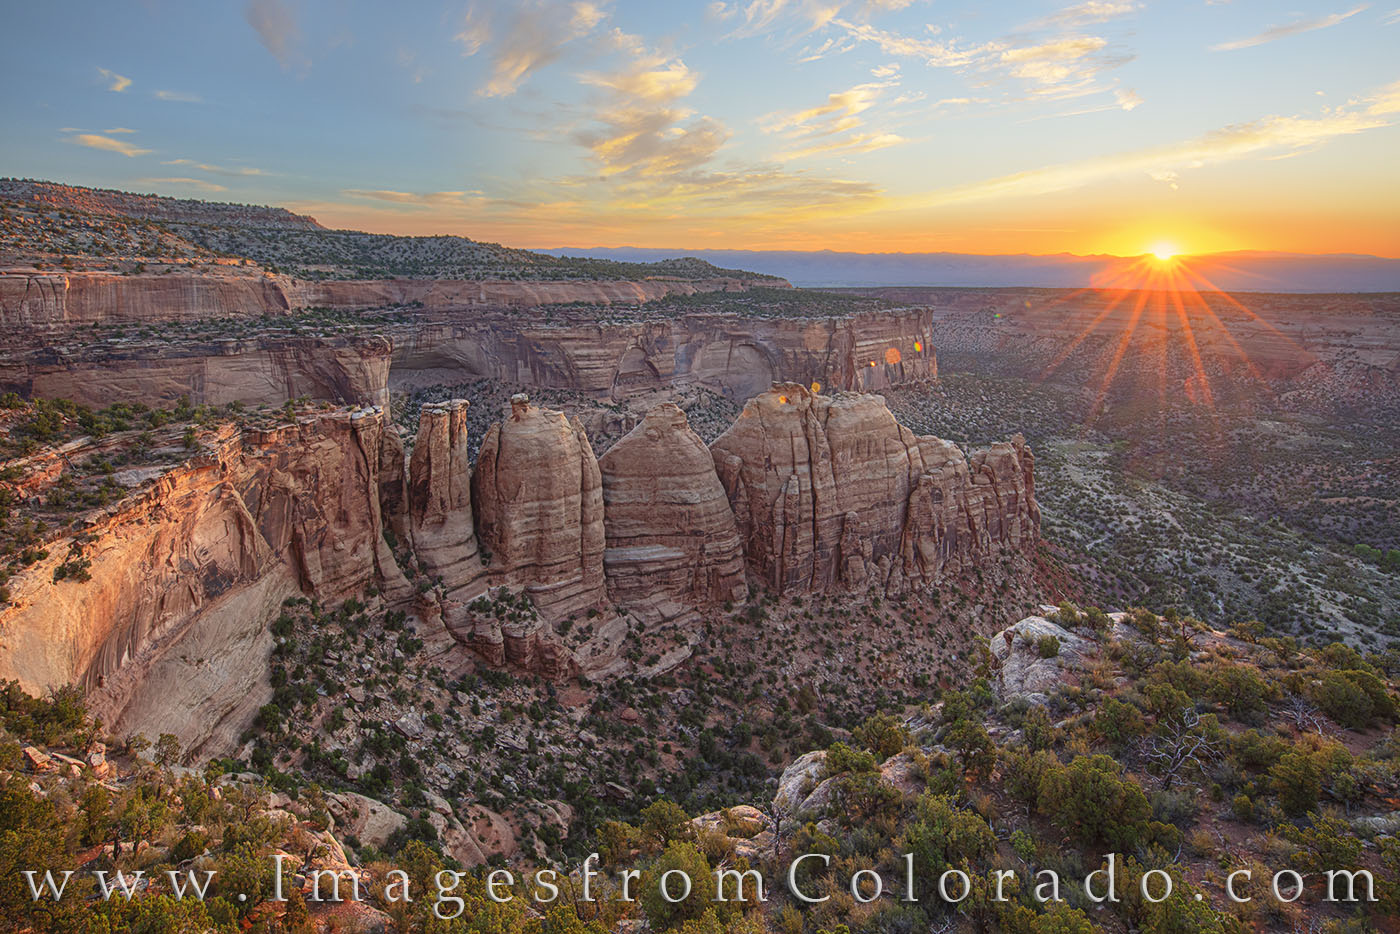 Along Rim Rock Road in Colorado National Monument, the sun rises over one of the famous viewpoints - Artist Point. Here, grand...